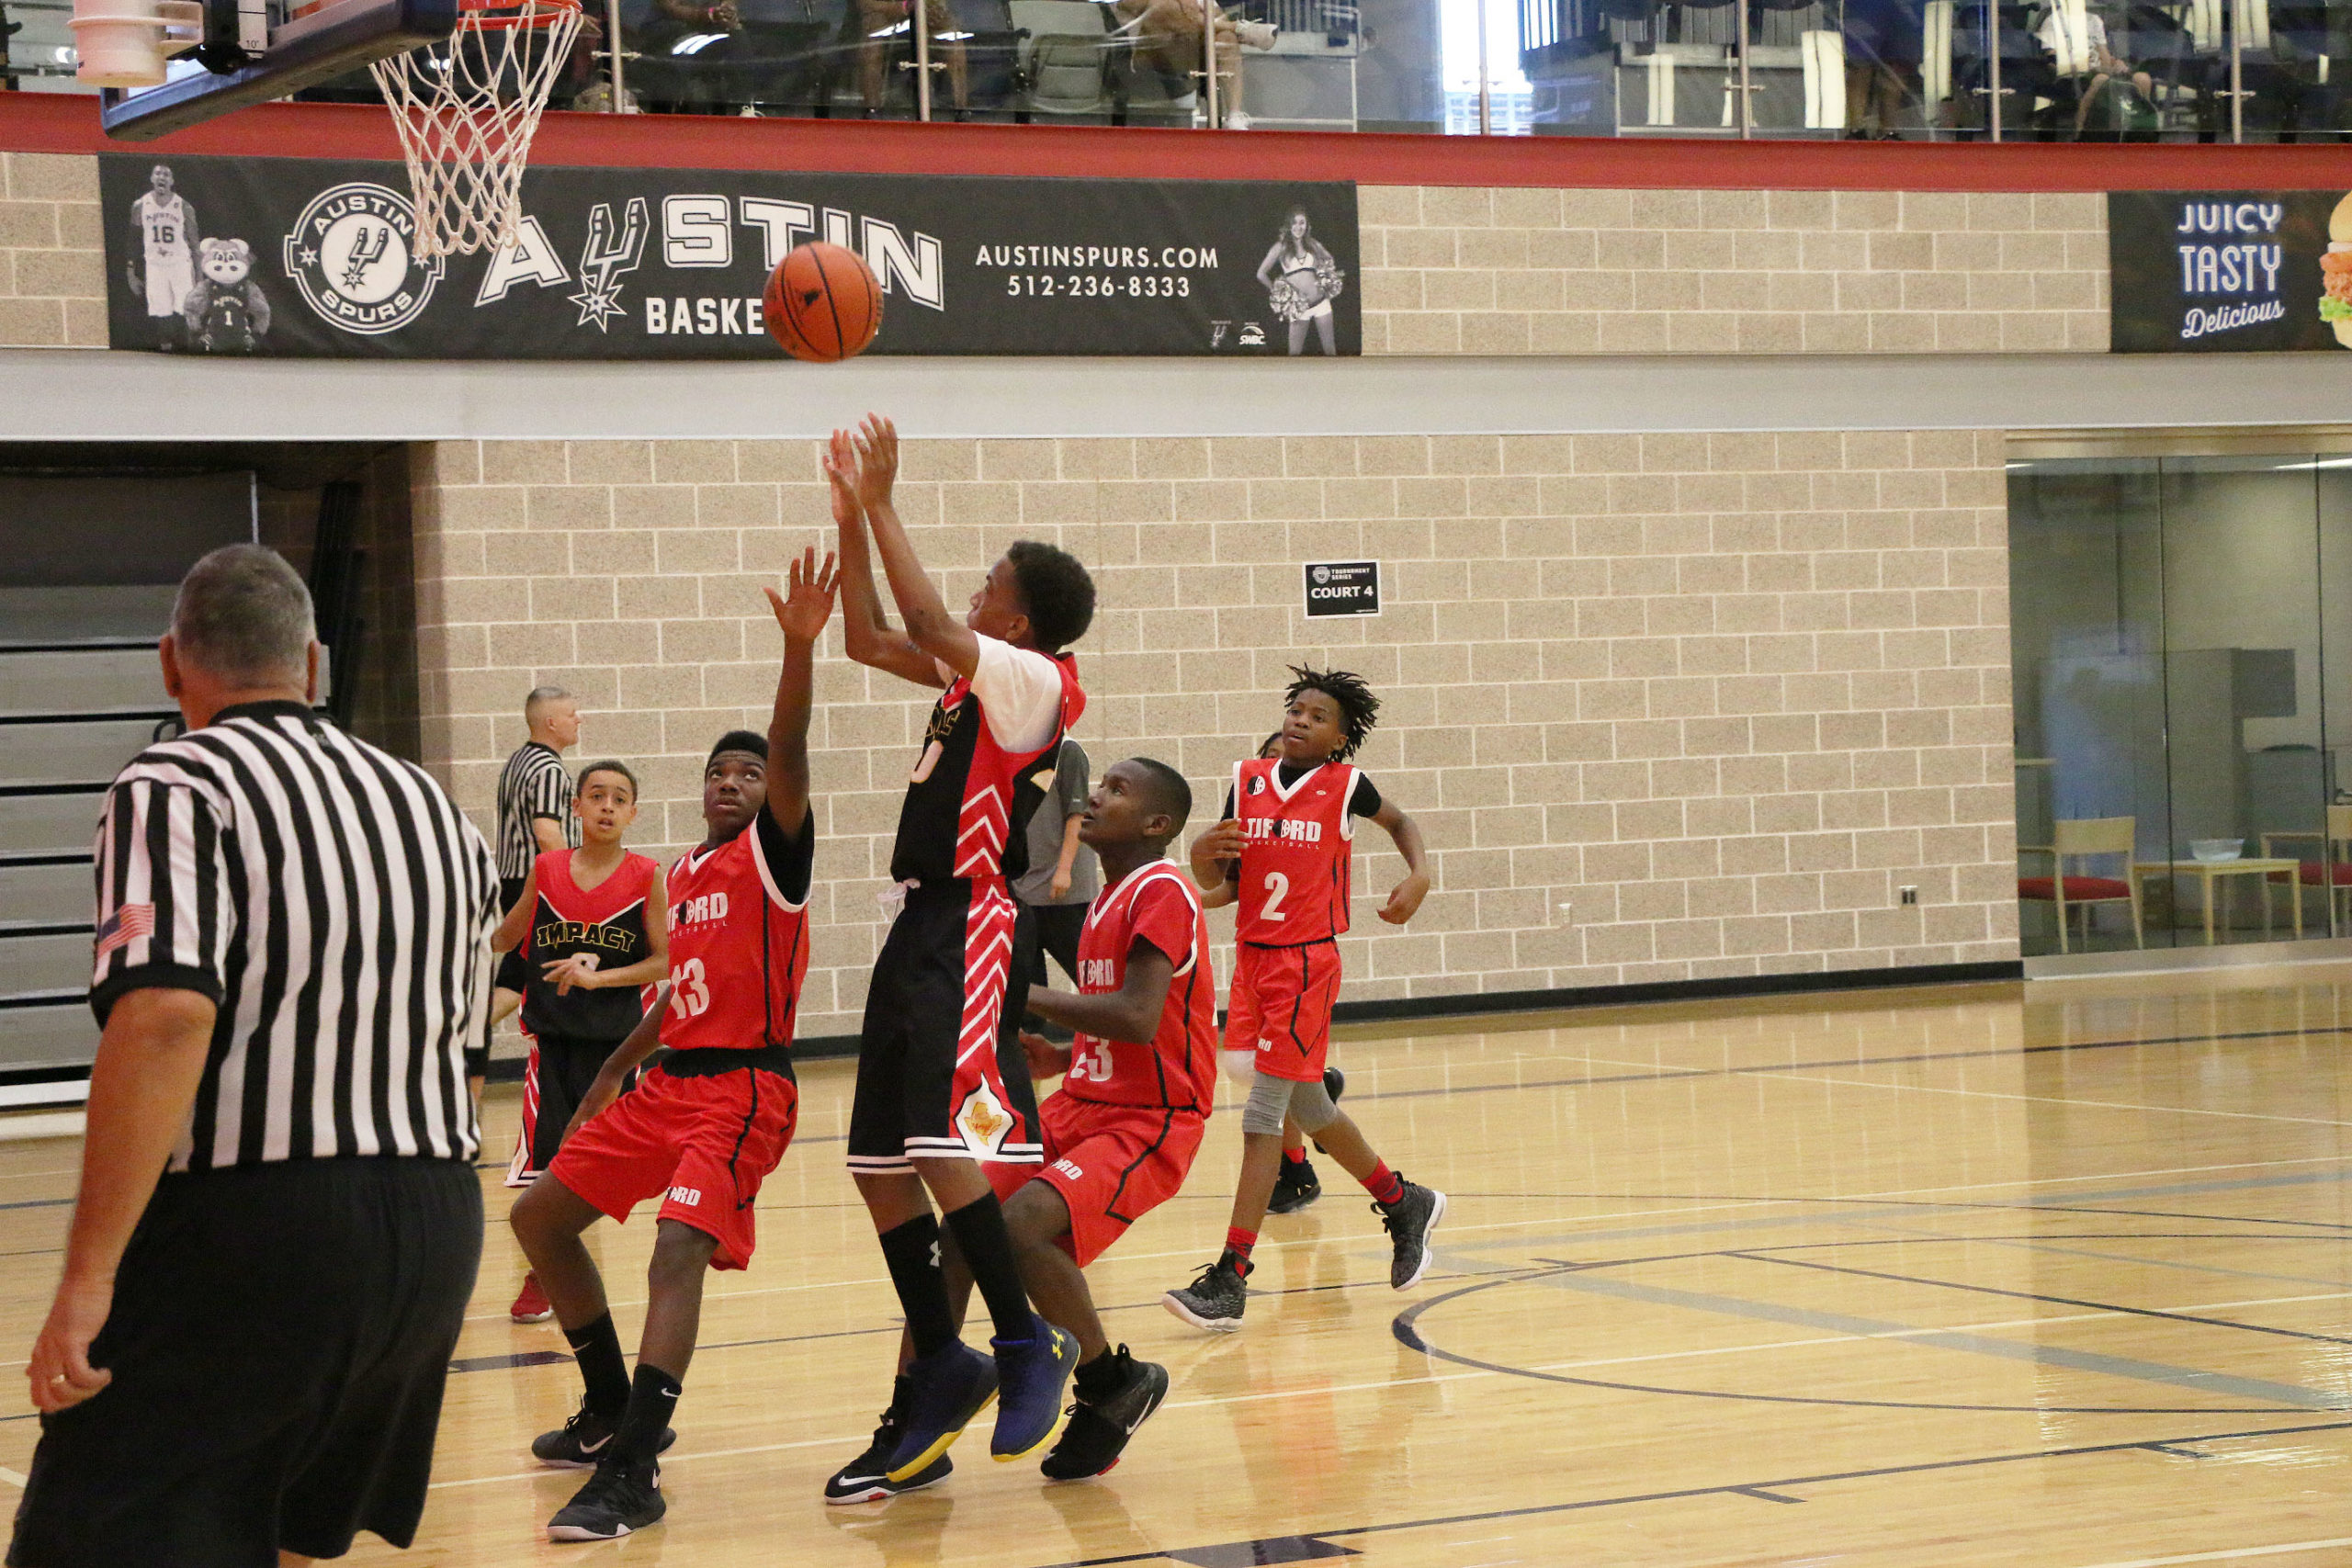 Boys' basketball teams playing at the Round Rock Sports Center